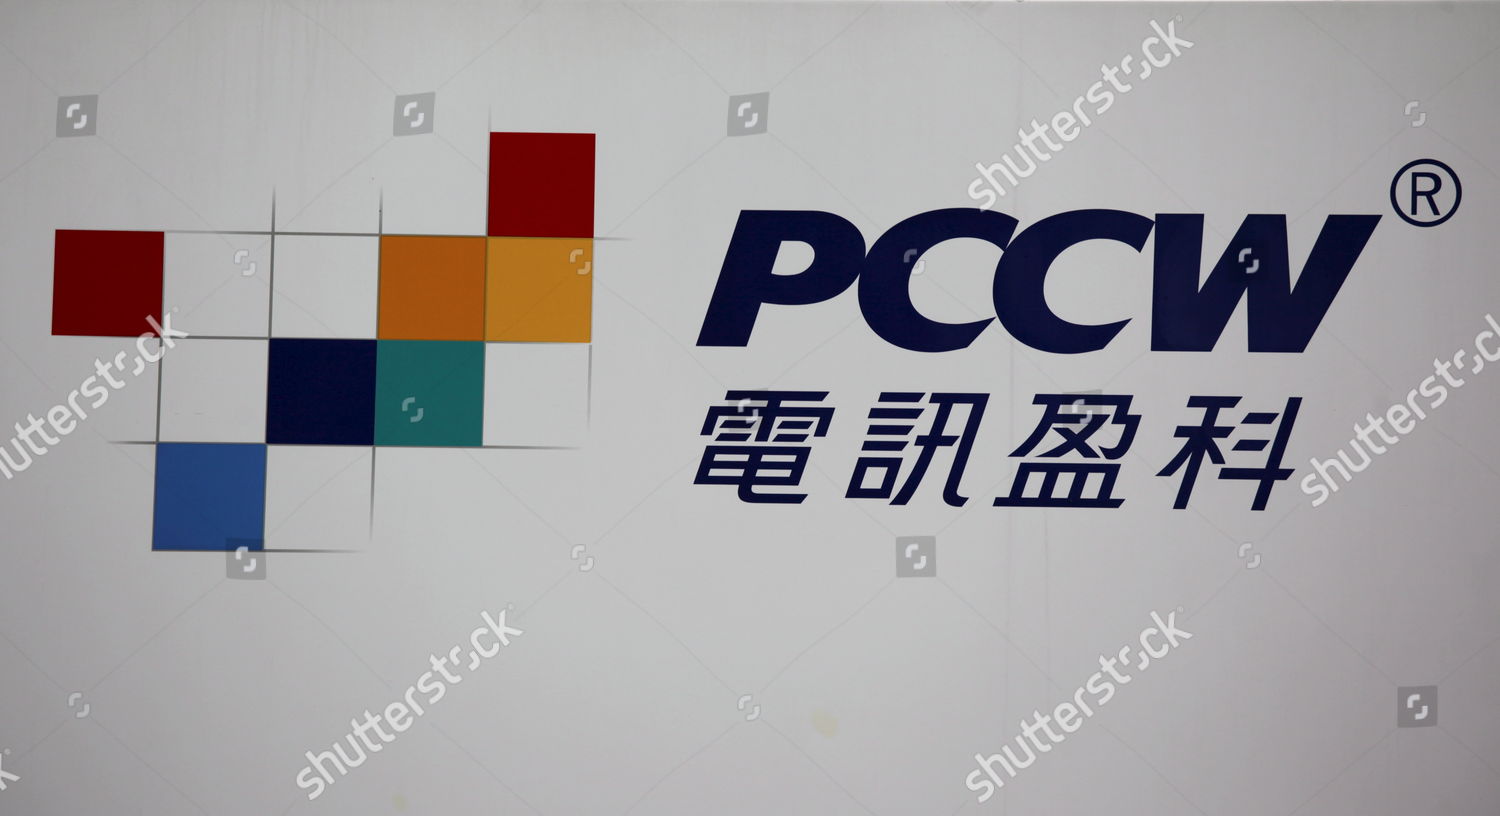 Pccw Logo On Their Office Building Hong Editorial Stock Photo